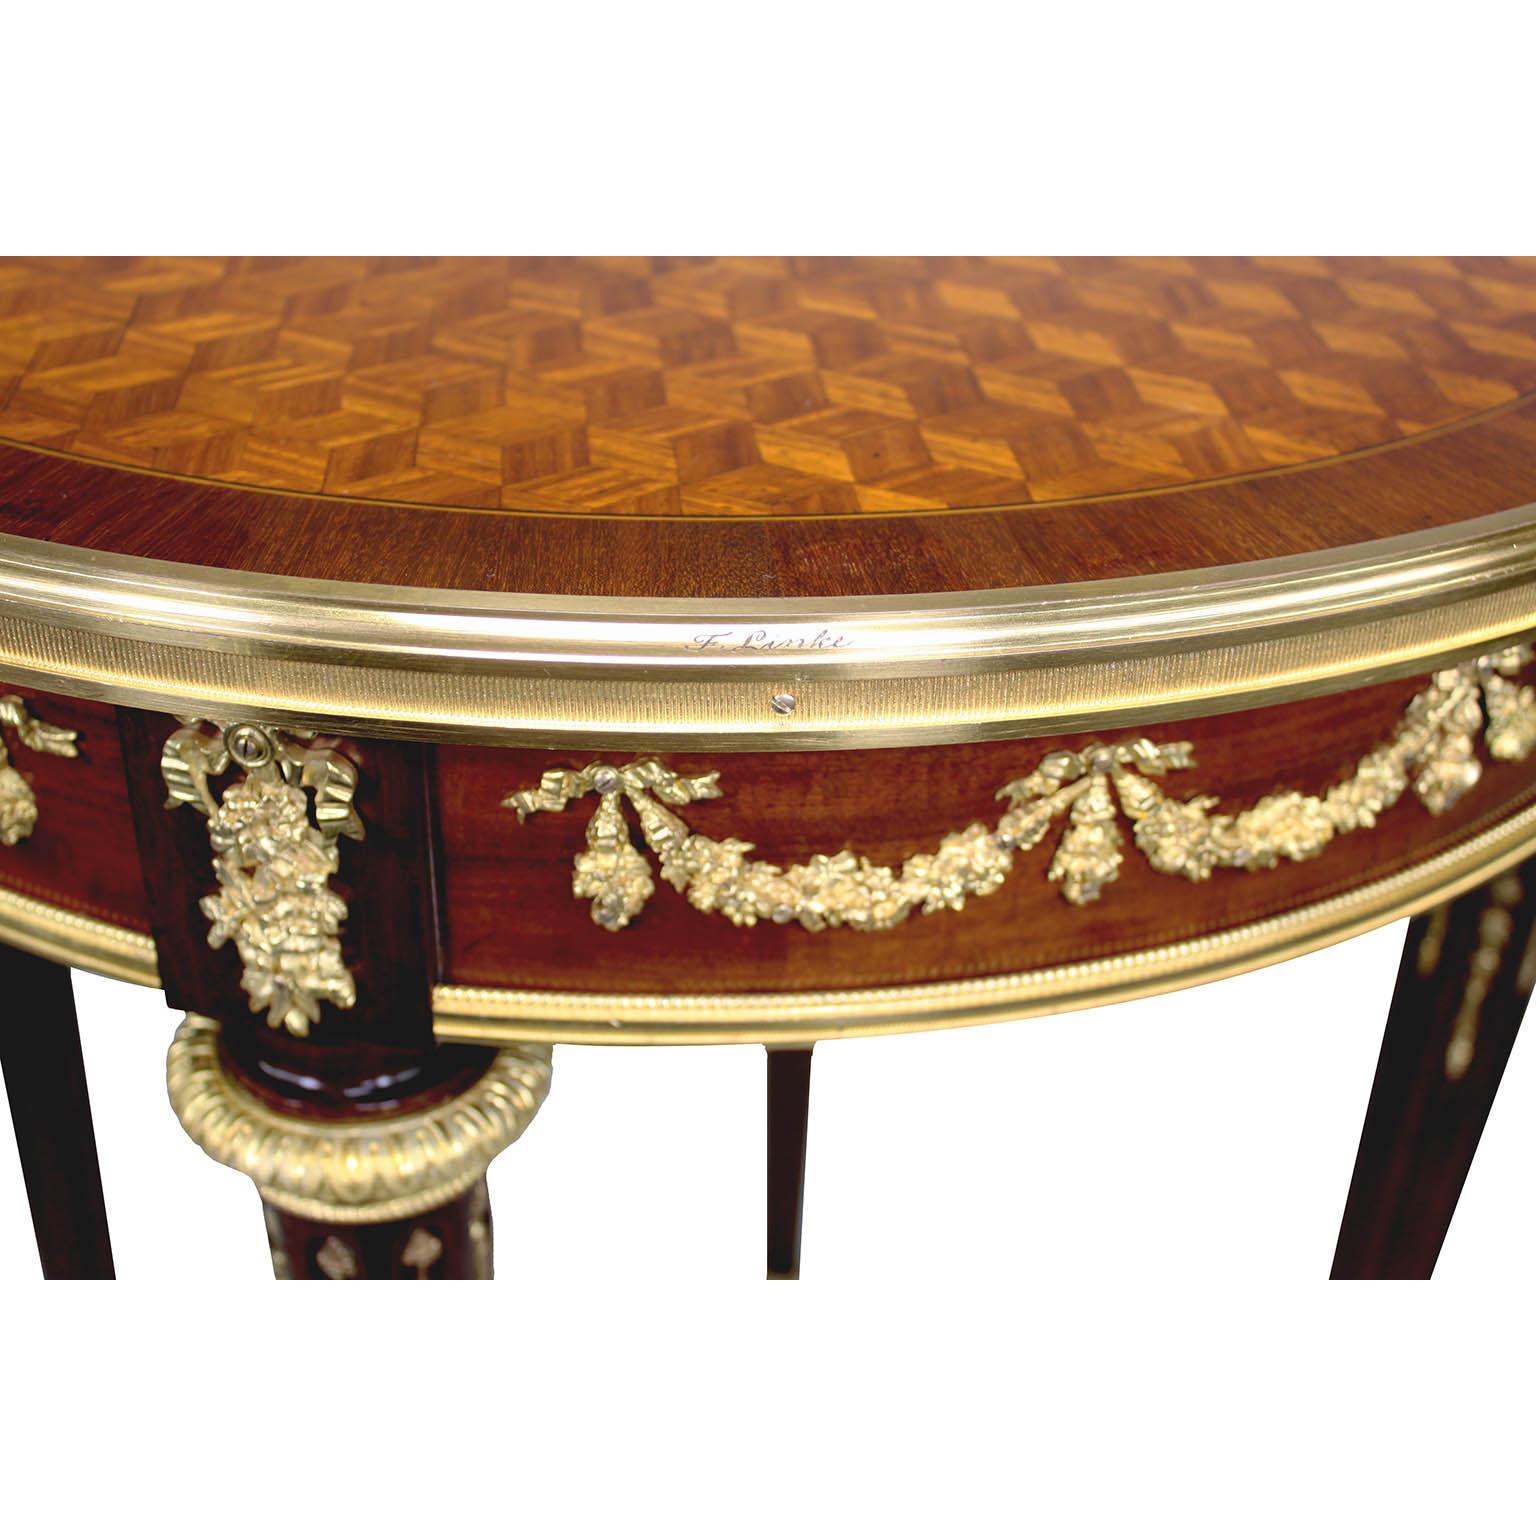 Early 20th Century French Louis XV Style Ormolu & Parquetry Guéridon End Table by François Linke For Sale